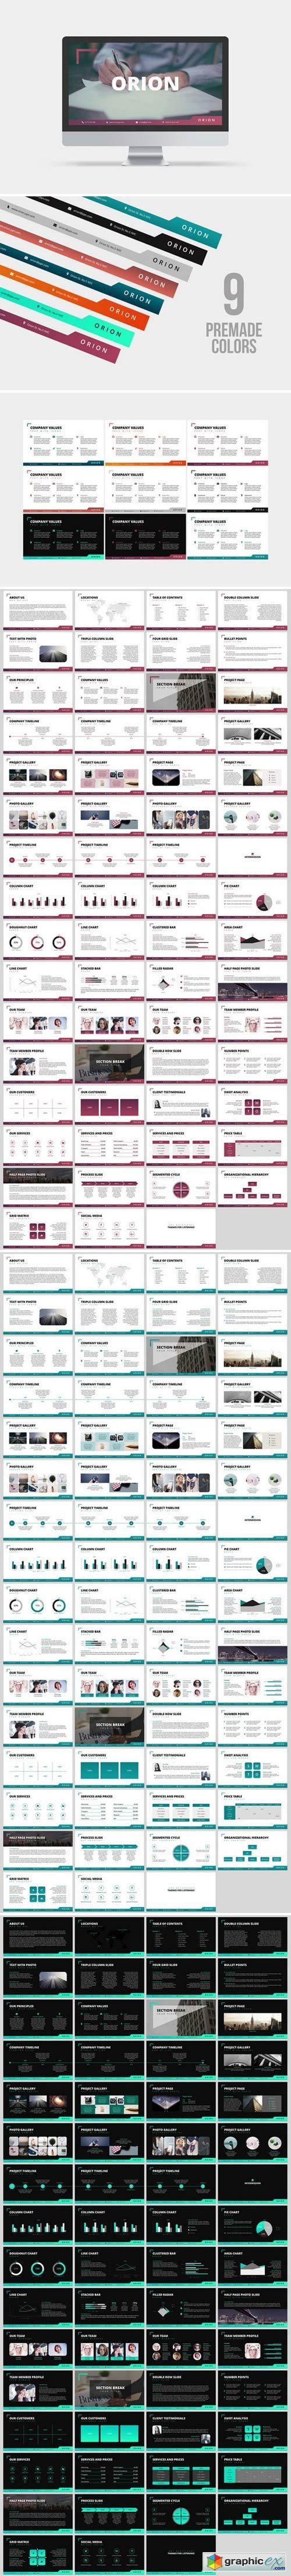 Orion PowerPoint Template